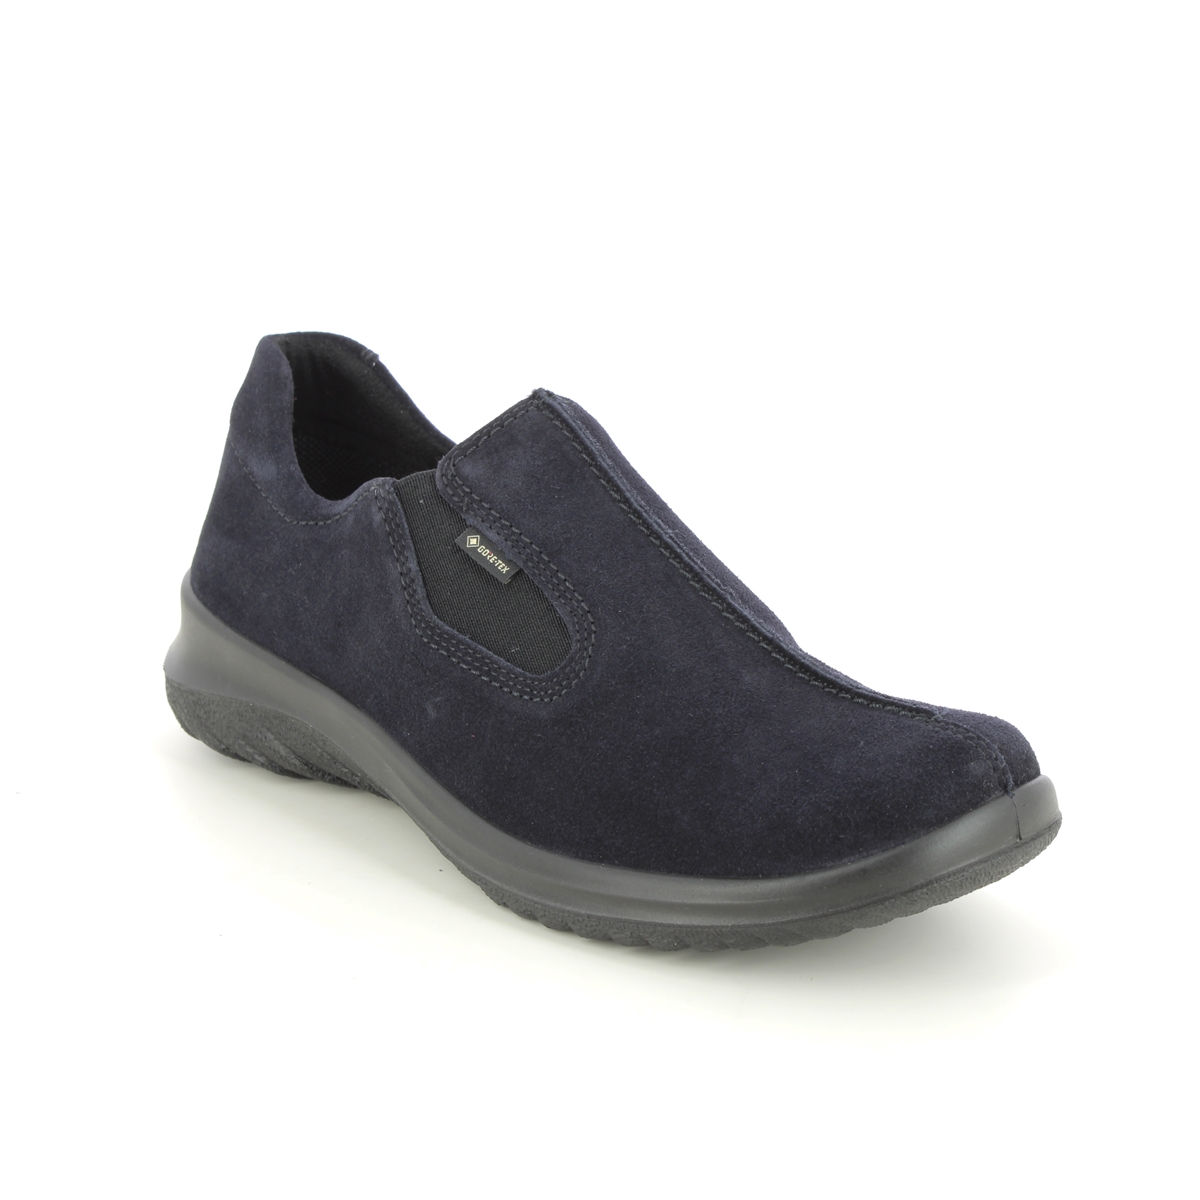 Legero Soft Shoe Gtx Navy Suede Womens Comfort Slip On Shoes 09568-80 In Size 4.5 In Plain Navy Suede